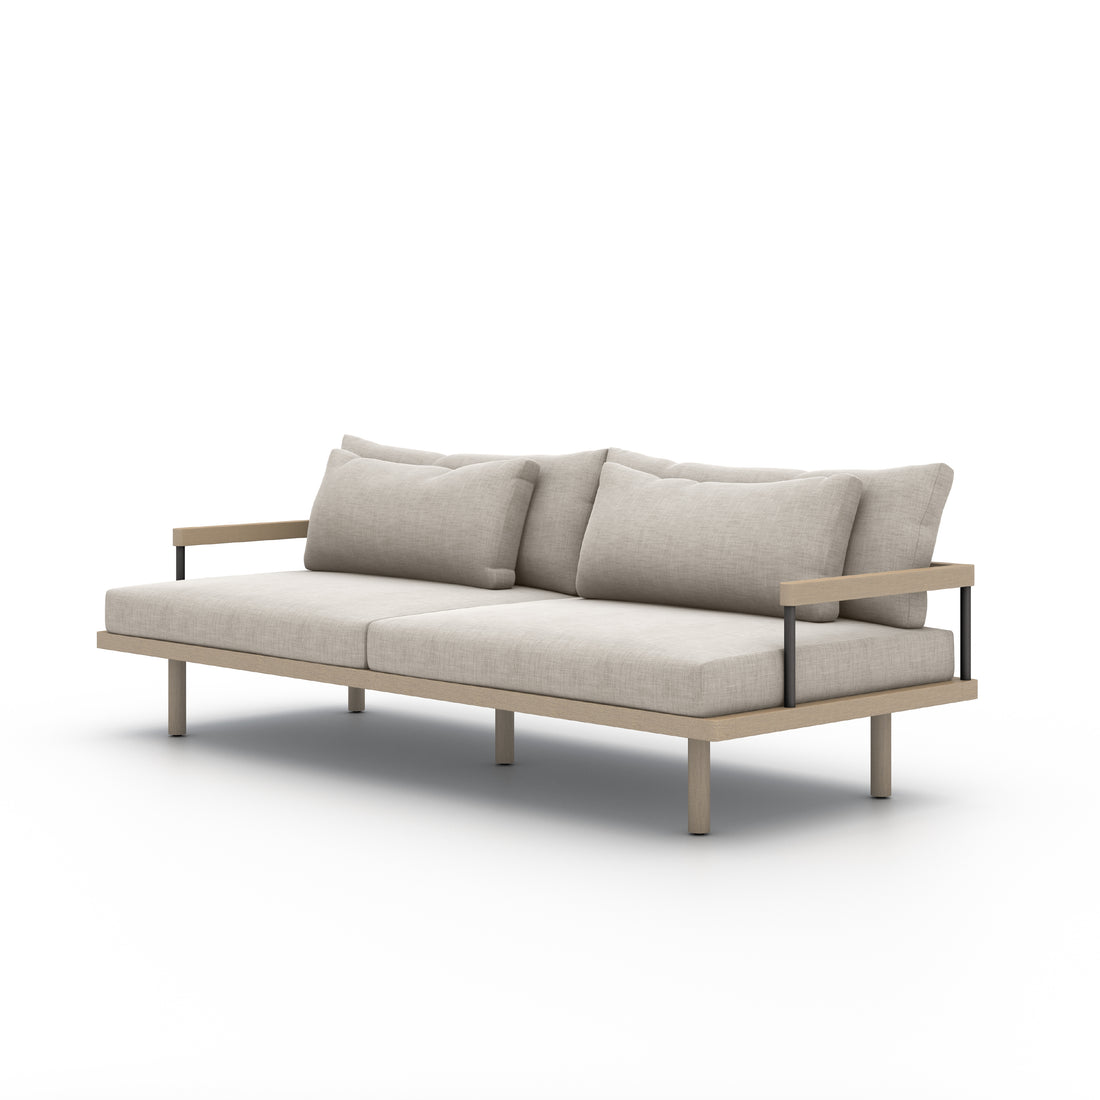 Whalers Outdoor Sofa